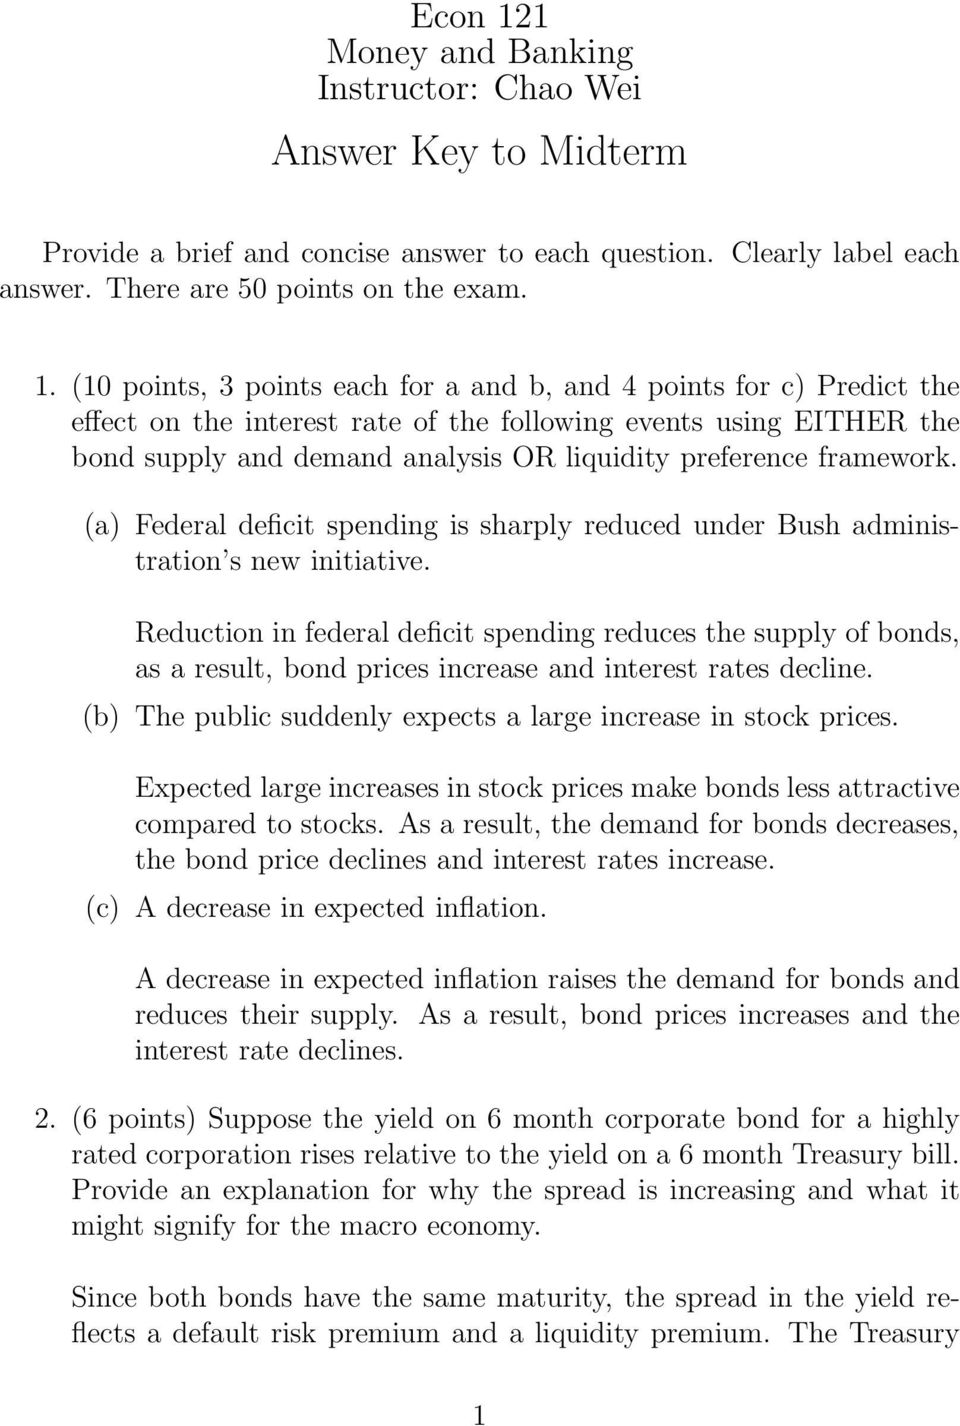 (10 points, 3 points each for a and b, and 4 points for c) Predict the effect on the interest rate of the following events using EITHER the bond supply and demand analysis OR liquidity preference